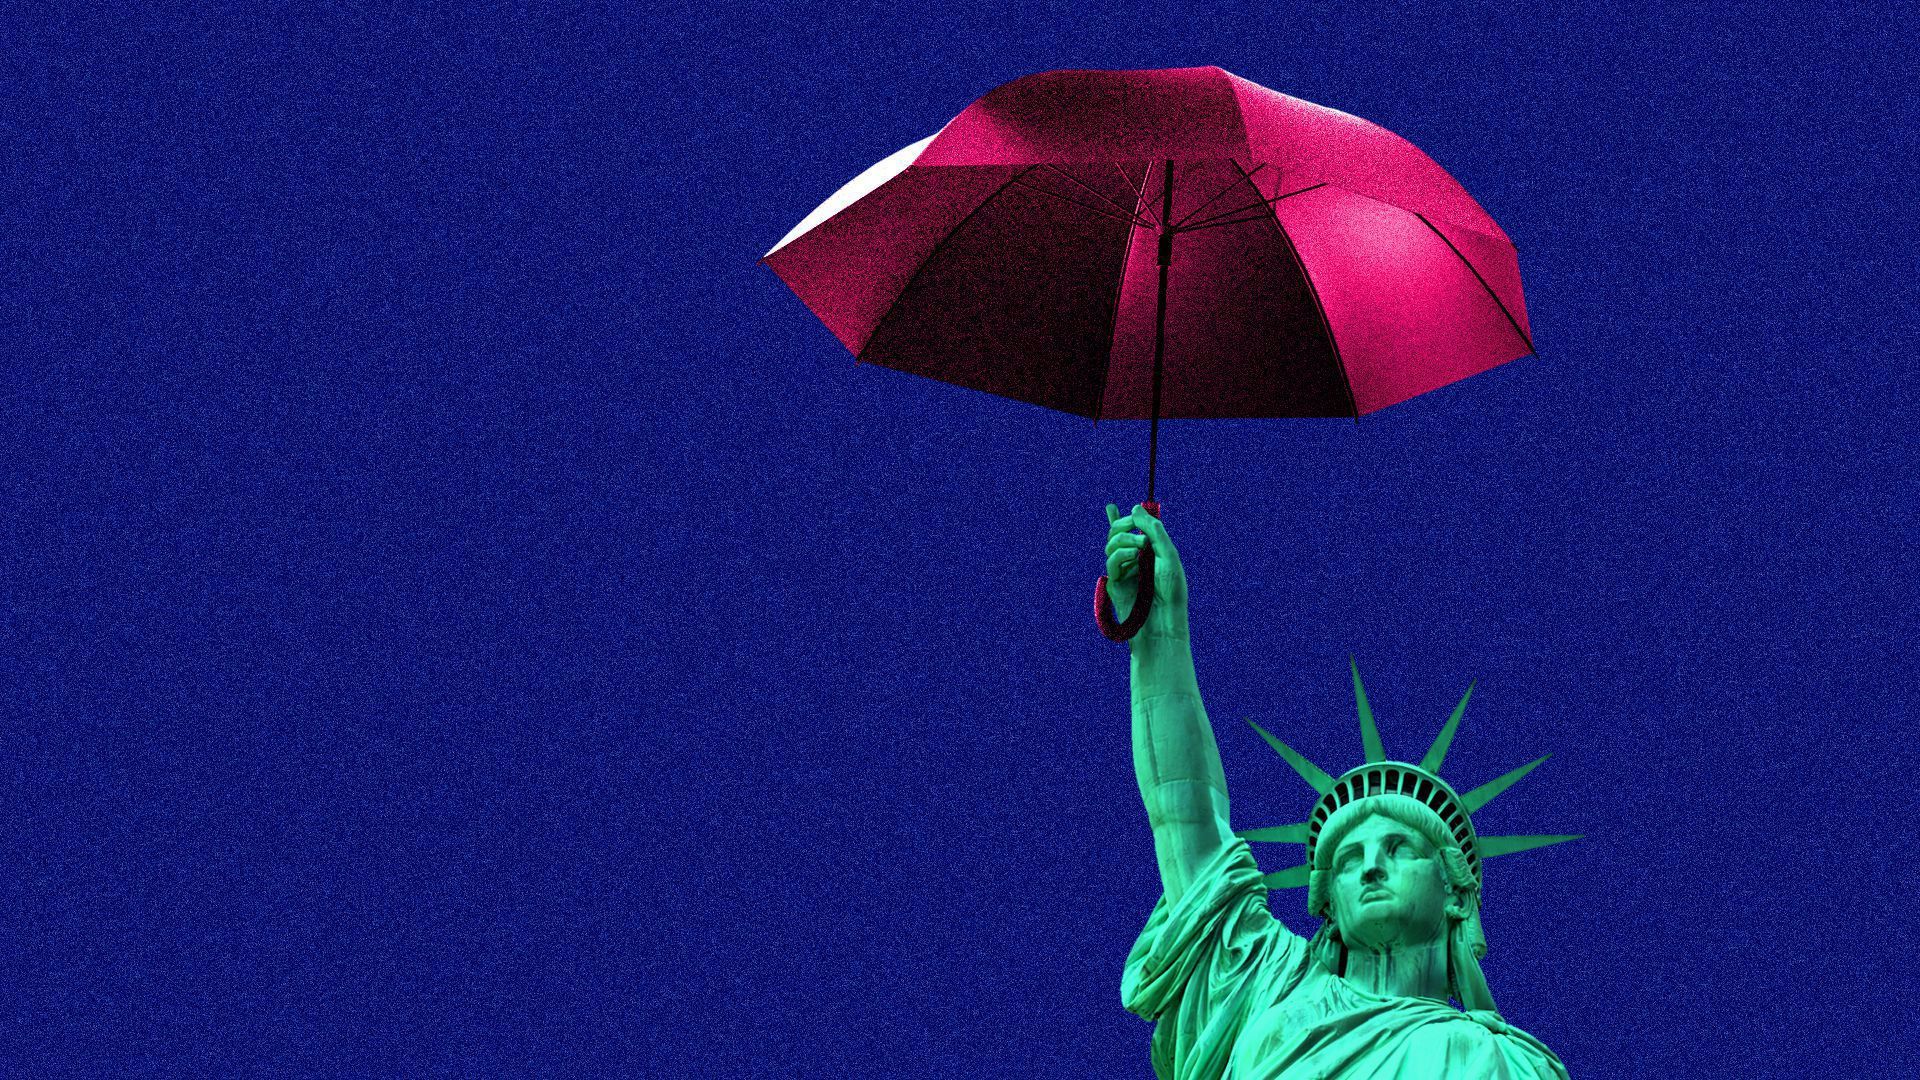 An illustration of the statue of liberty holding an umbrella. 